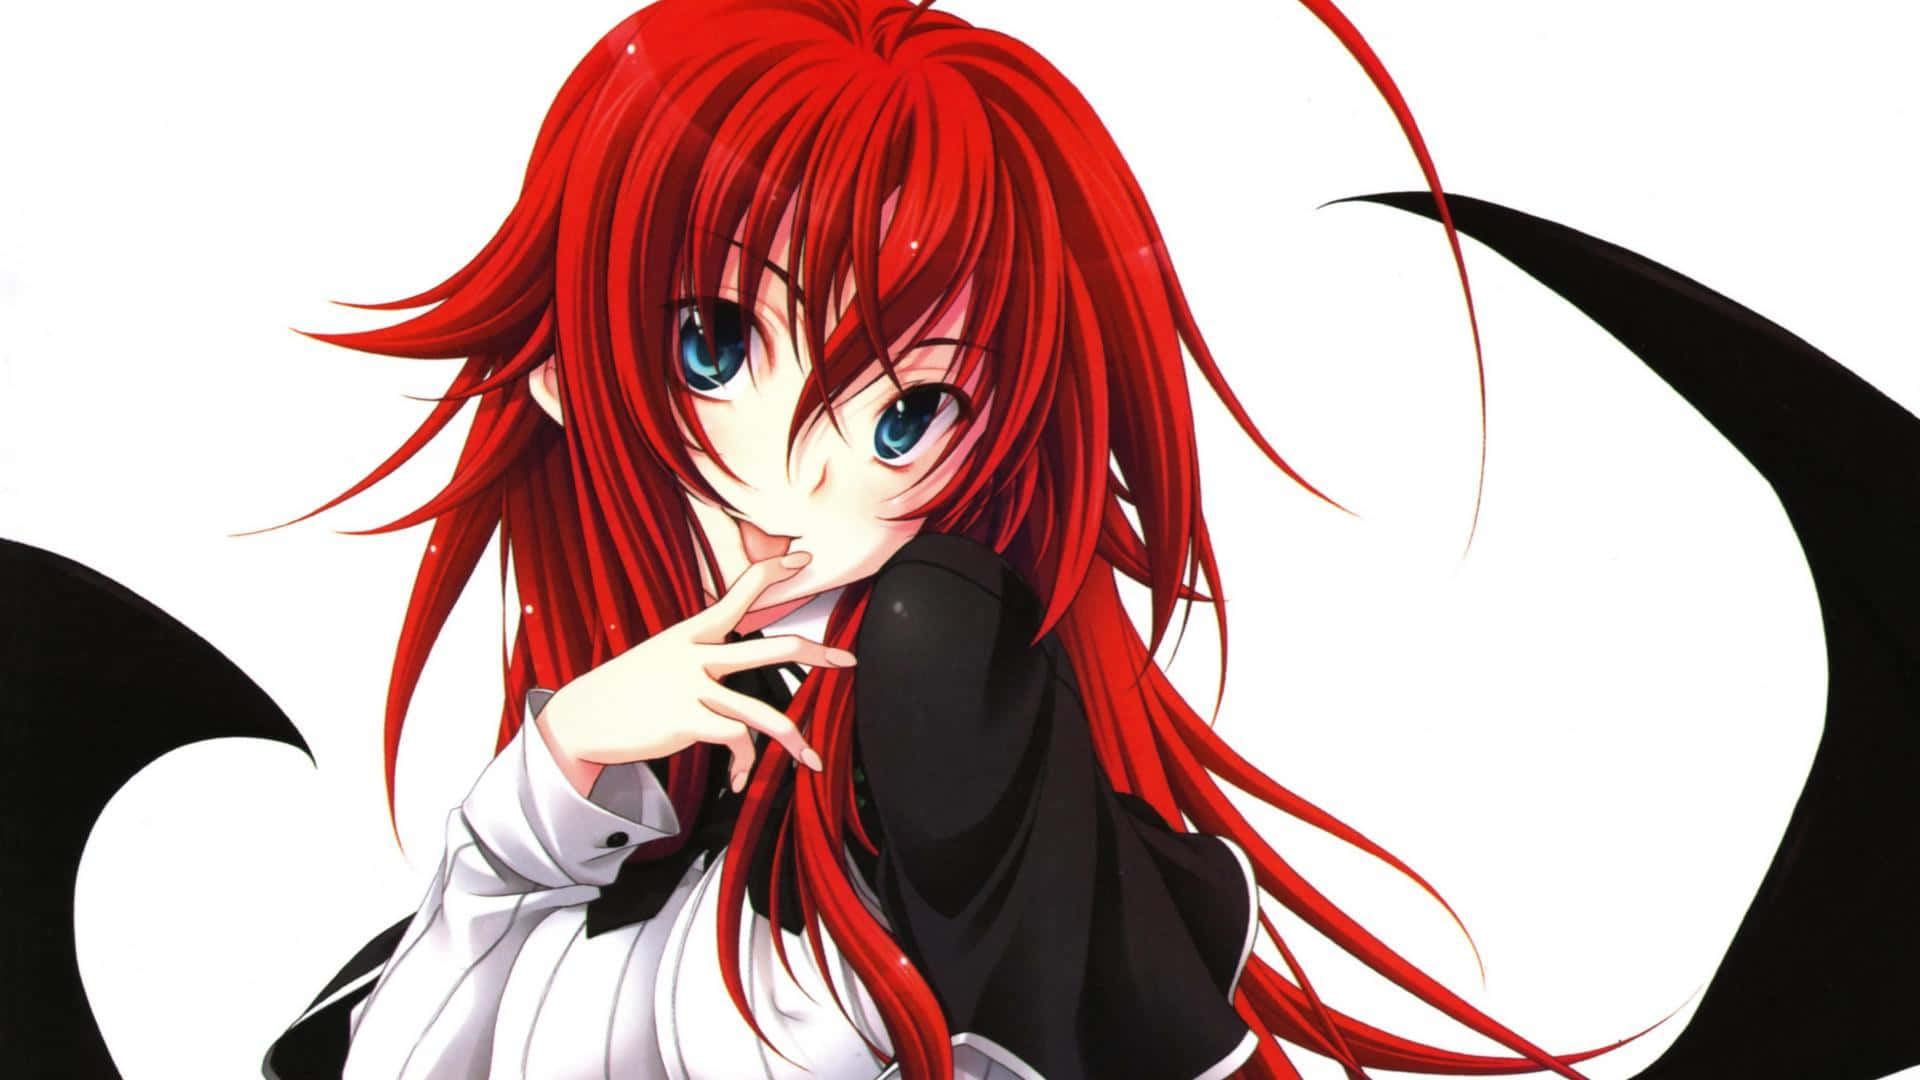 Rias Gremory in a Charming Pose Wallpaper